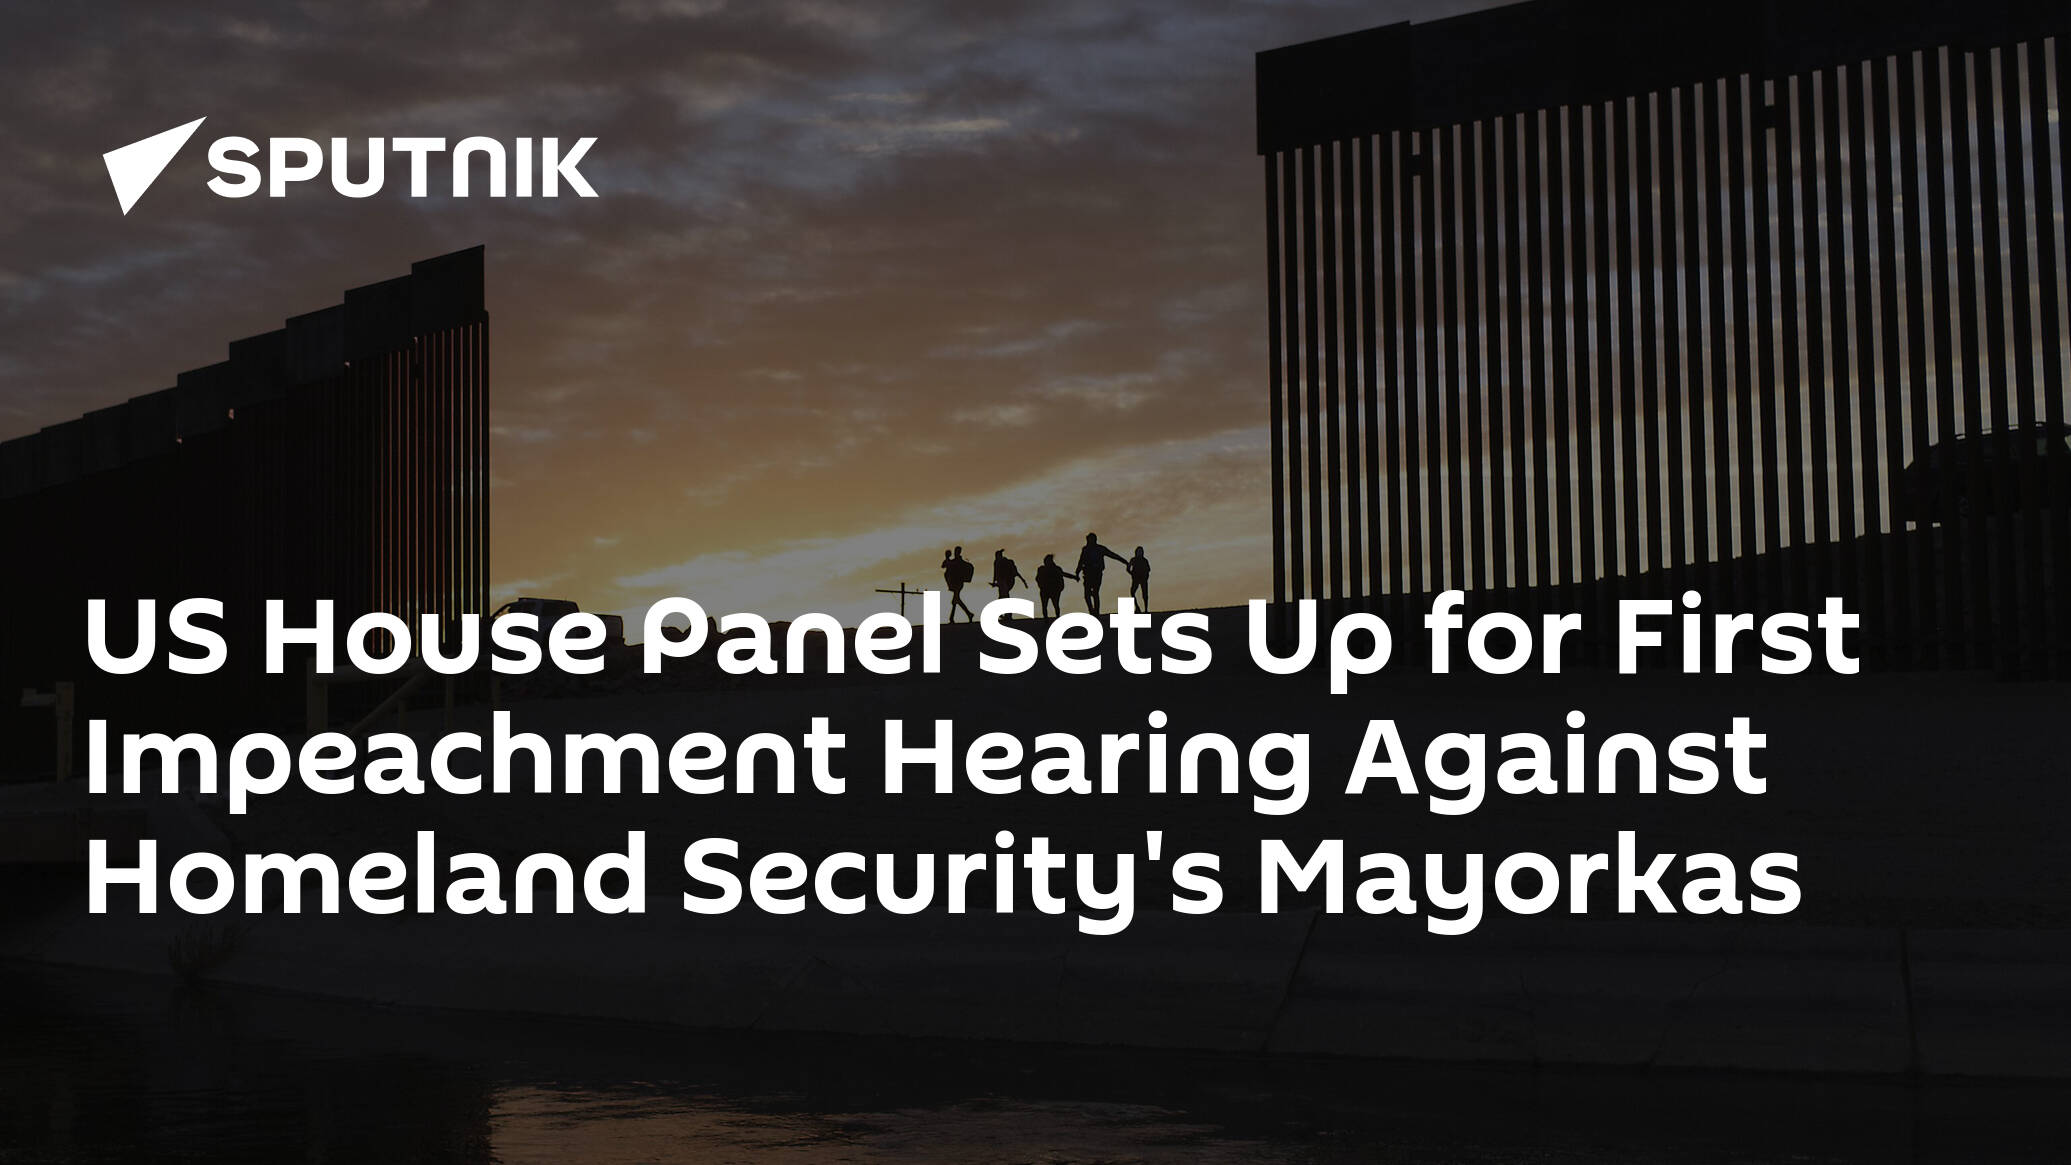 US House Panel Sets Up for First Impeachment Hearing Against Homeland Security's Mayorkas